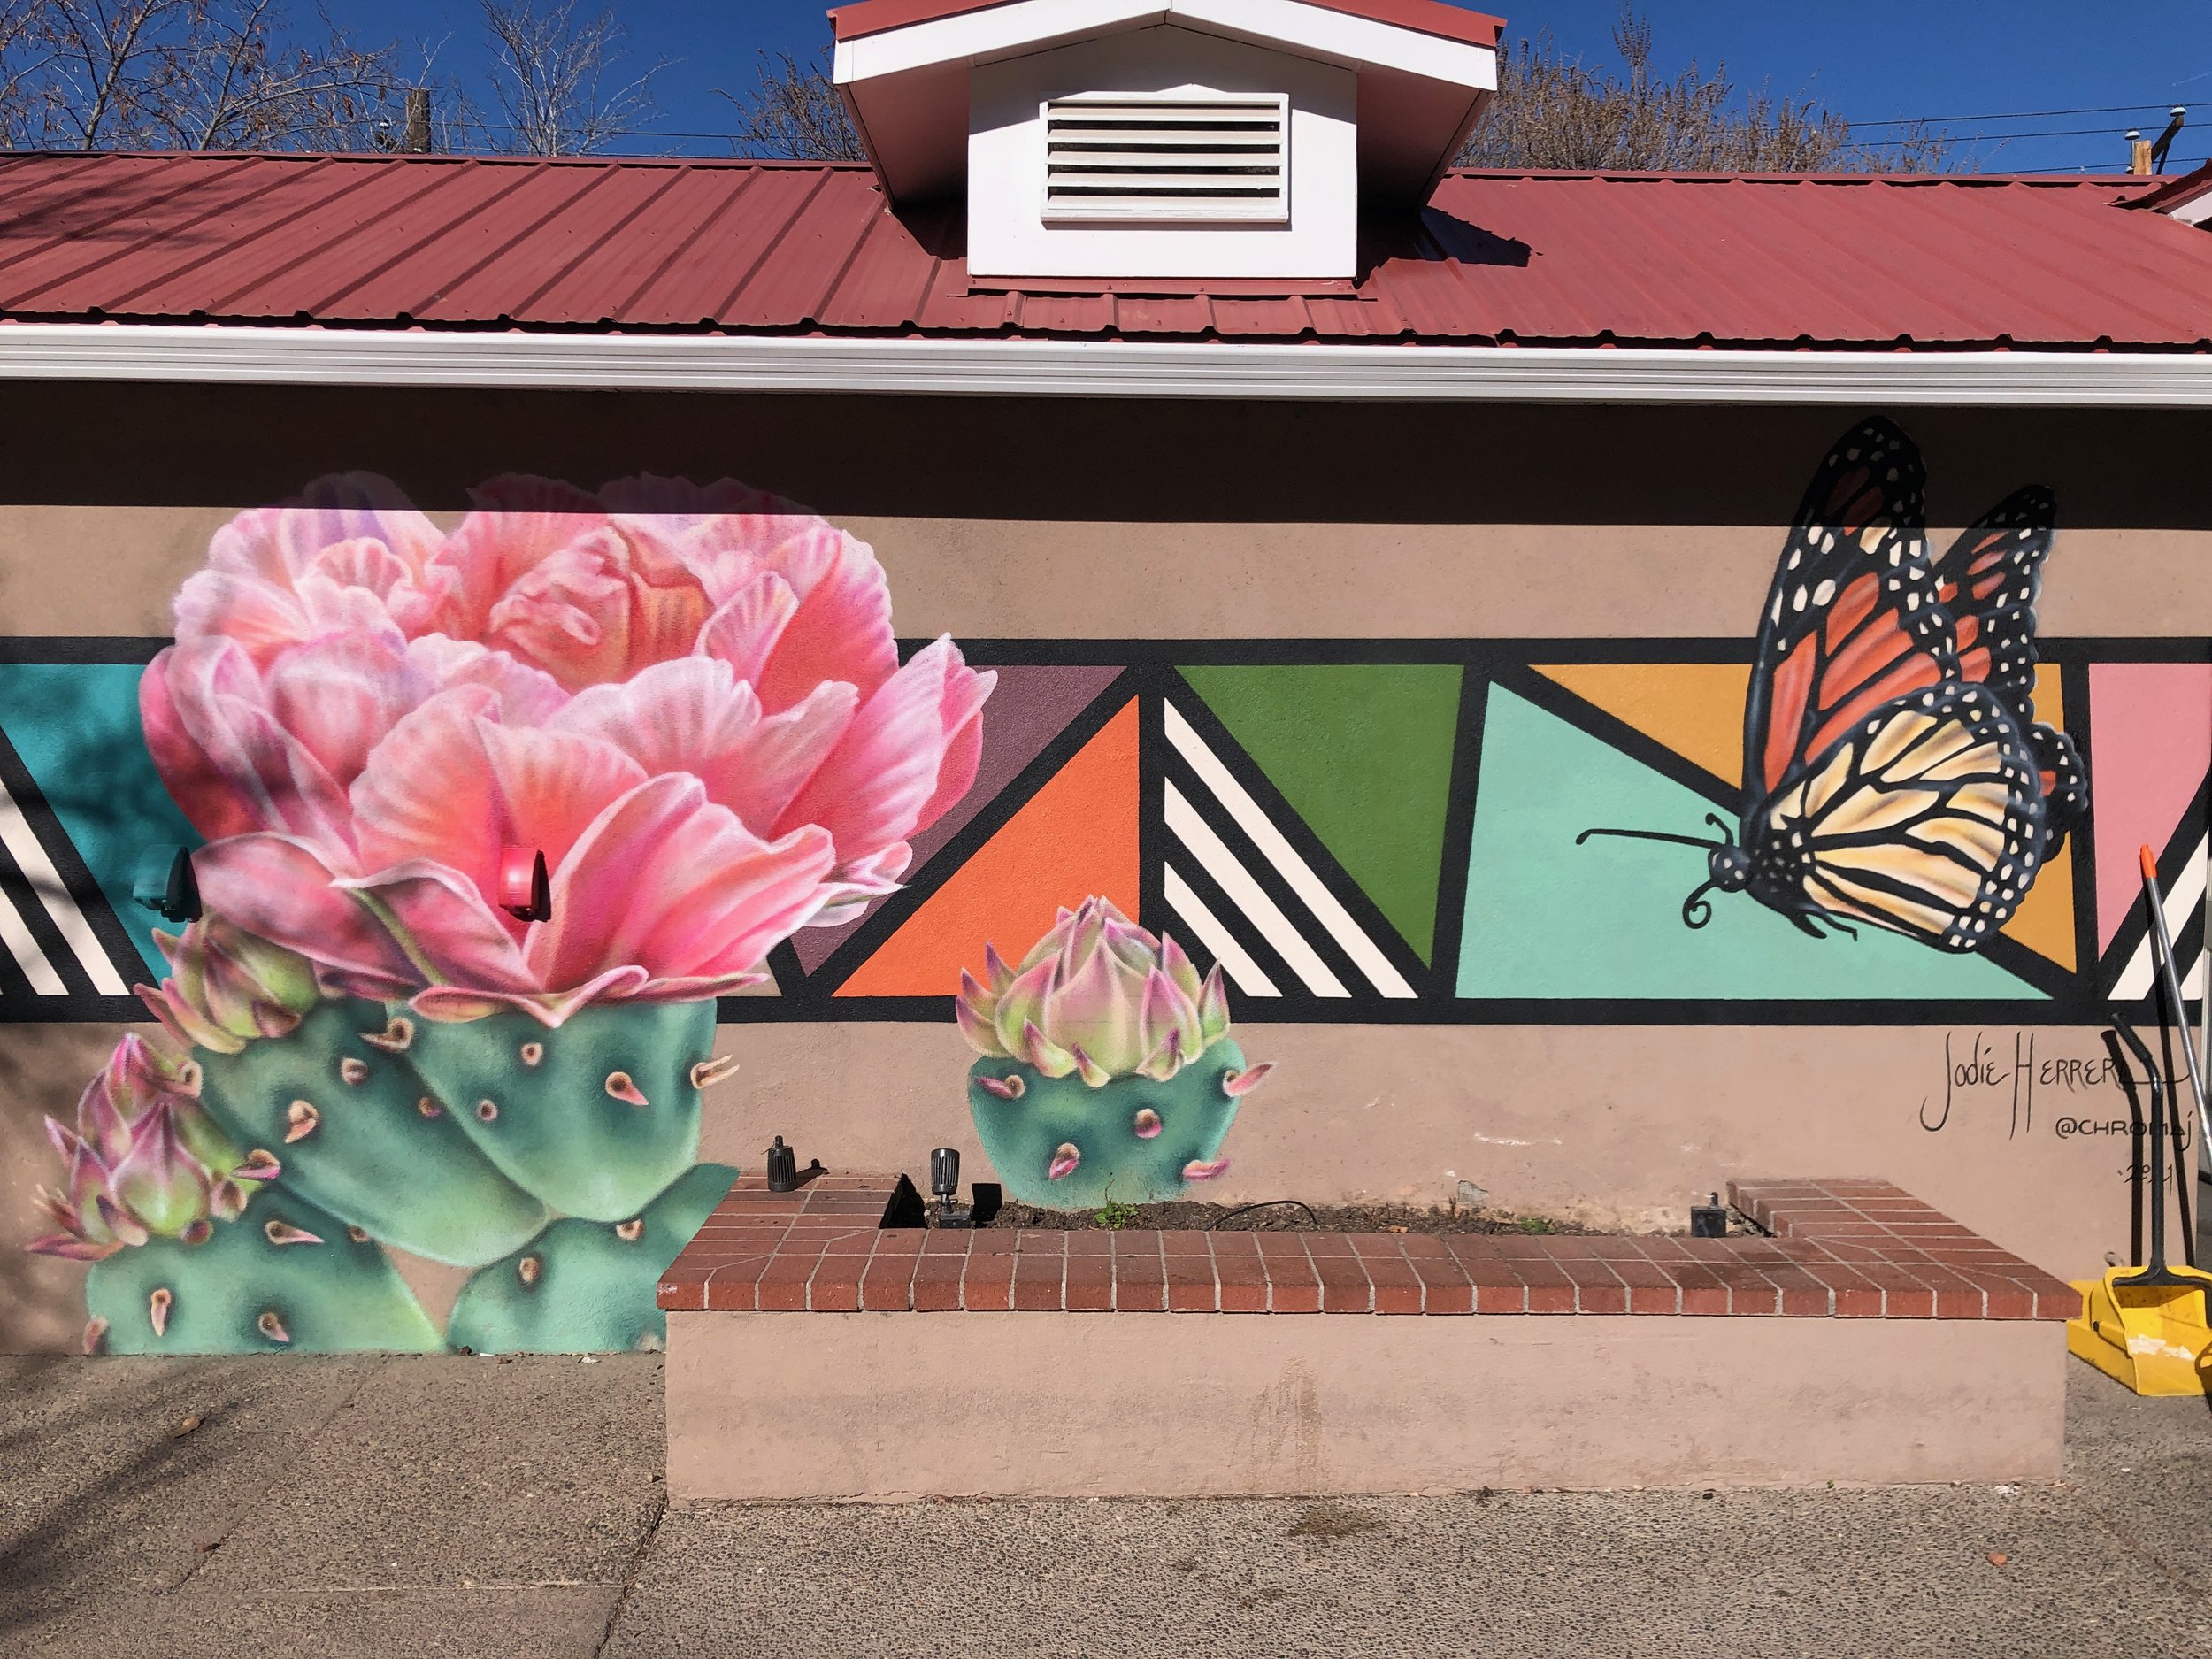 New Mexico Resilience, Mural by Jodie Herrera, Photo by Wade Roush